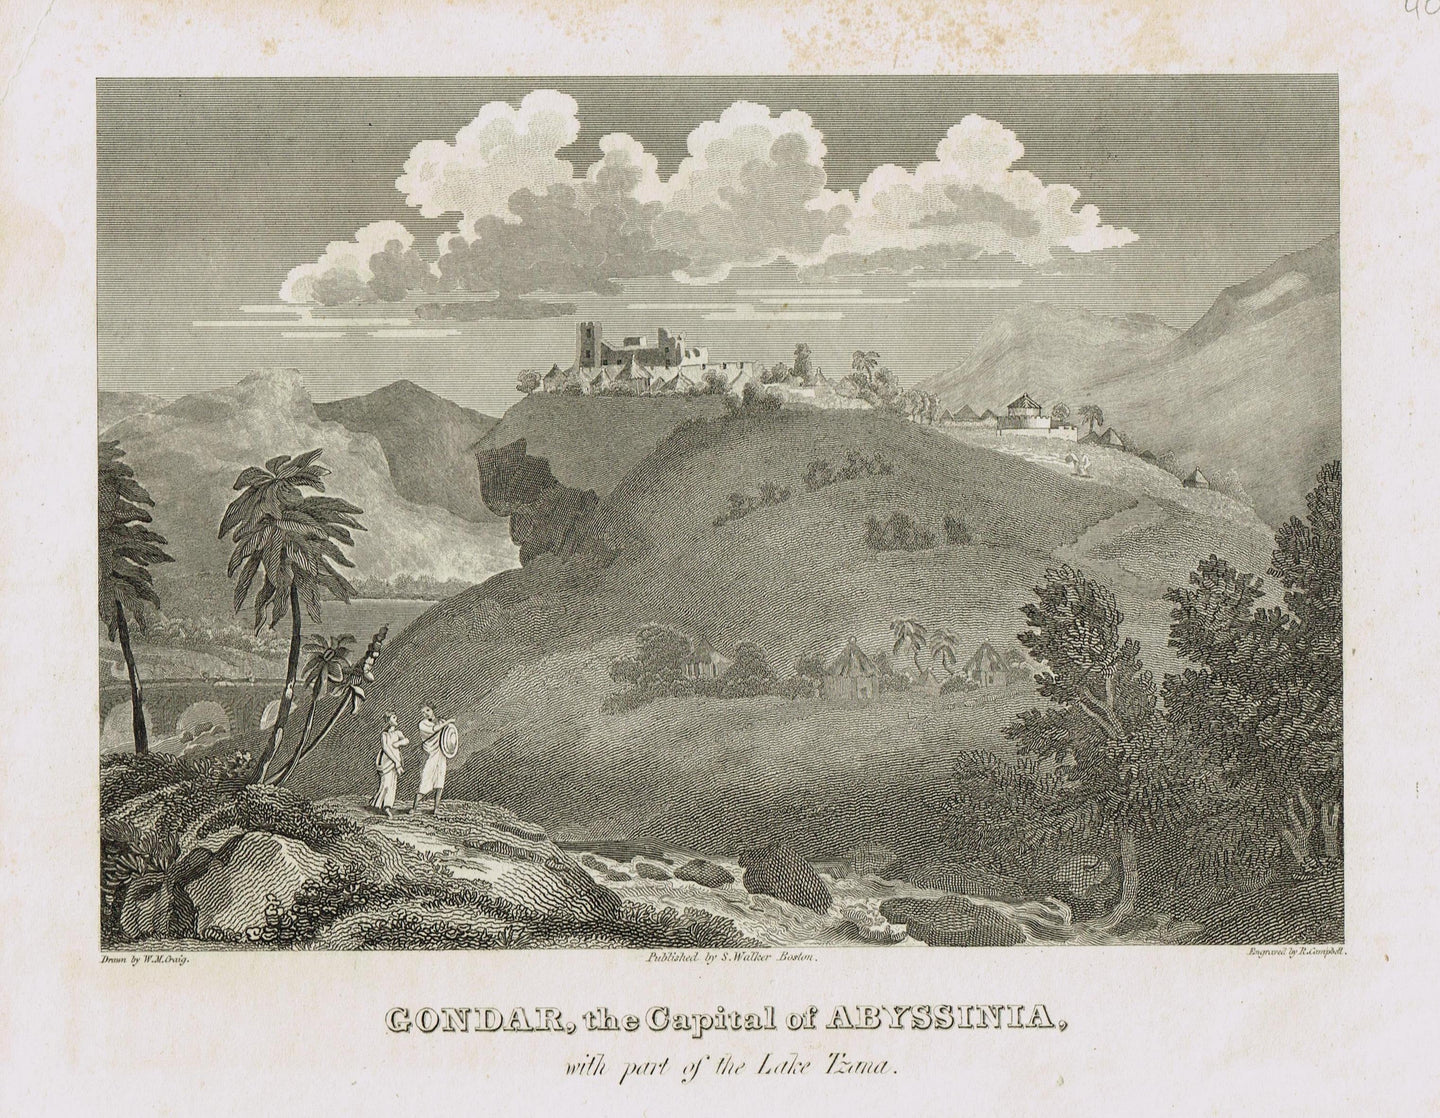 Genuine-Antique-Print-Gondar-the-Capital-of-Abyssinia-with-part-of-the-Lake-Tzama-Ethiopia--19th-century-Unknown-Publisher-Maps-Of-Antiquity